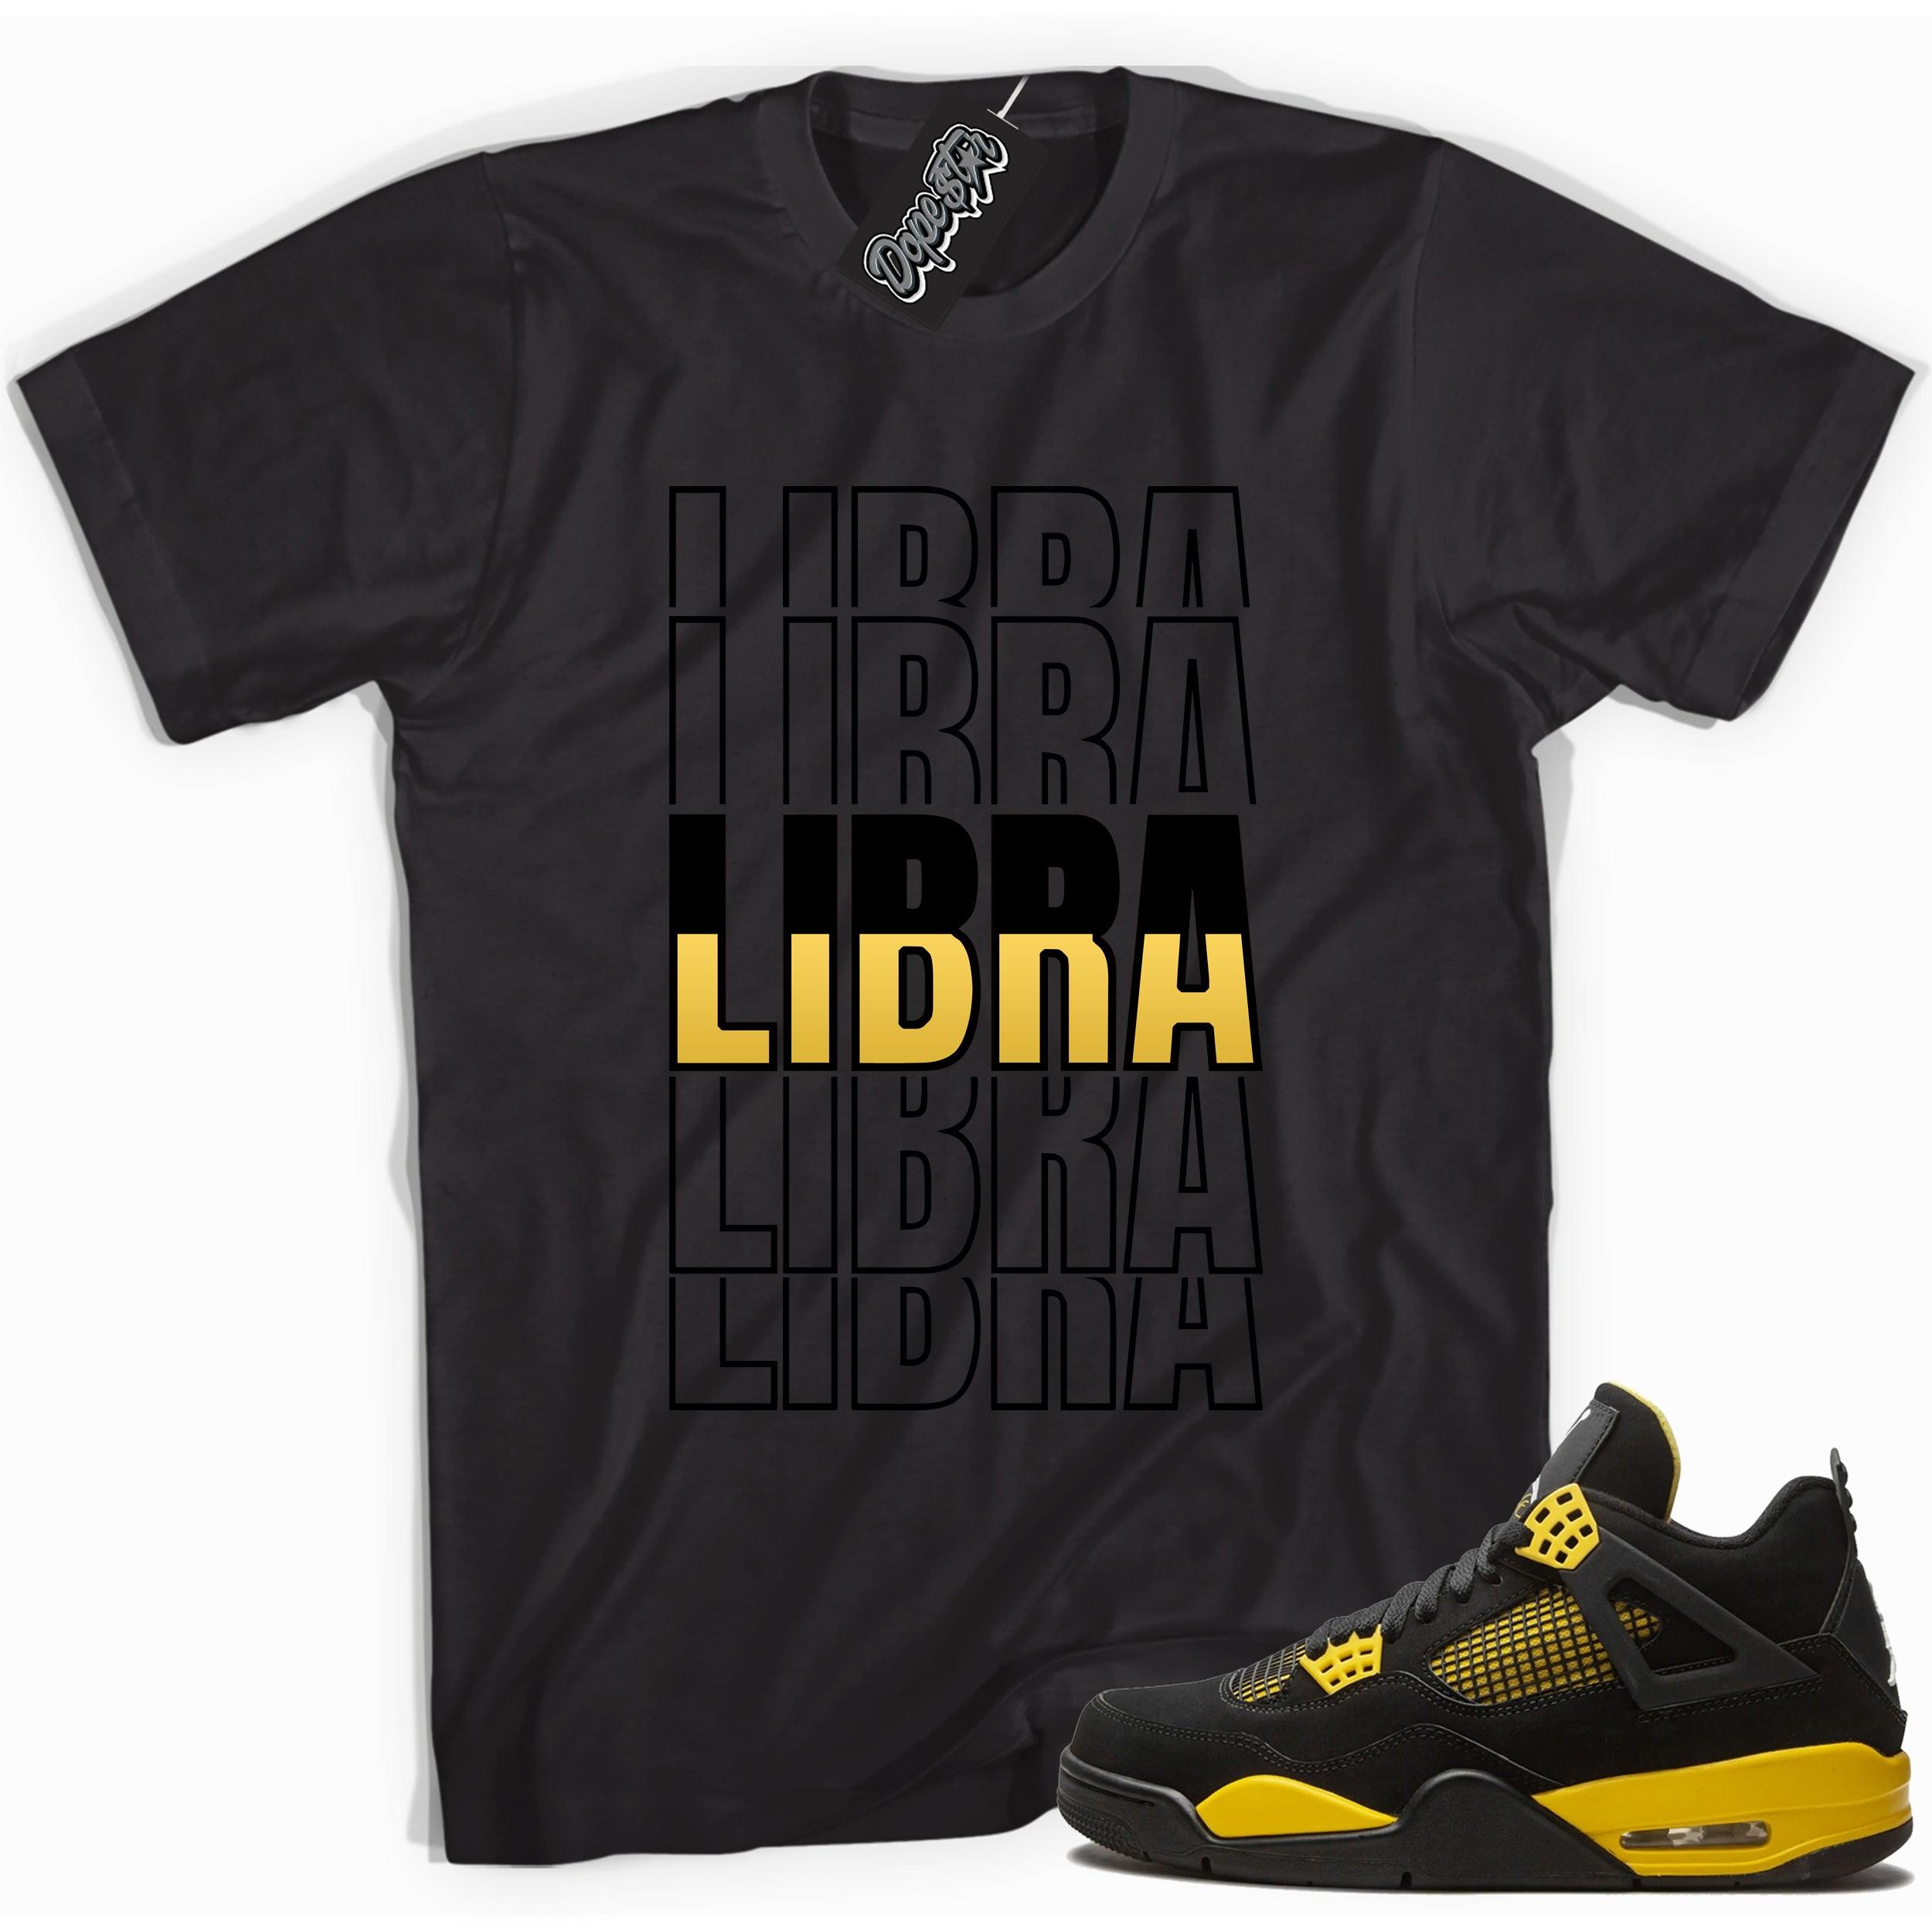 Cool black graphic tee with 'libra' print, that perfectly matches  Air Jordan 4 Thunder sneakers